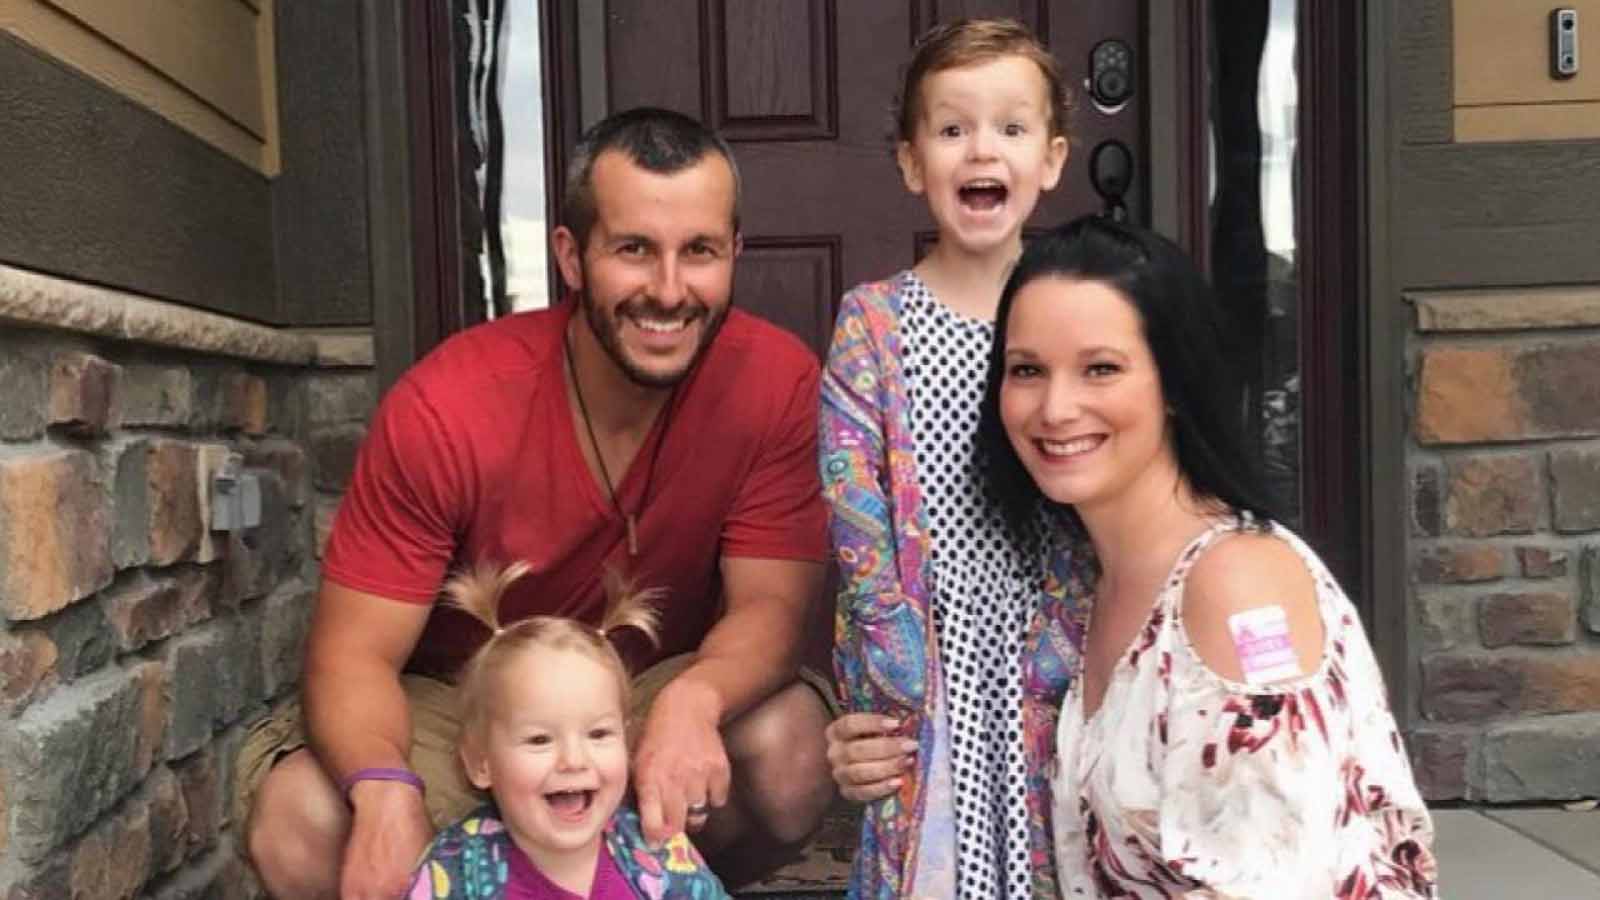 'American Murder: The Family Next Door' attempts to shine a new light on the murders Chris Watts committed against his family.